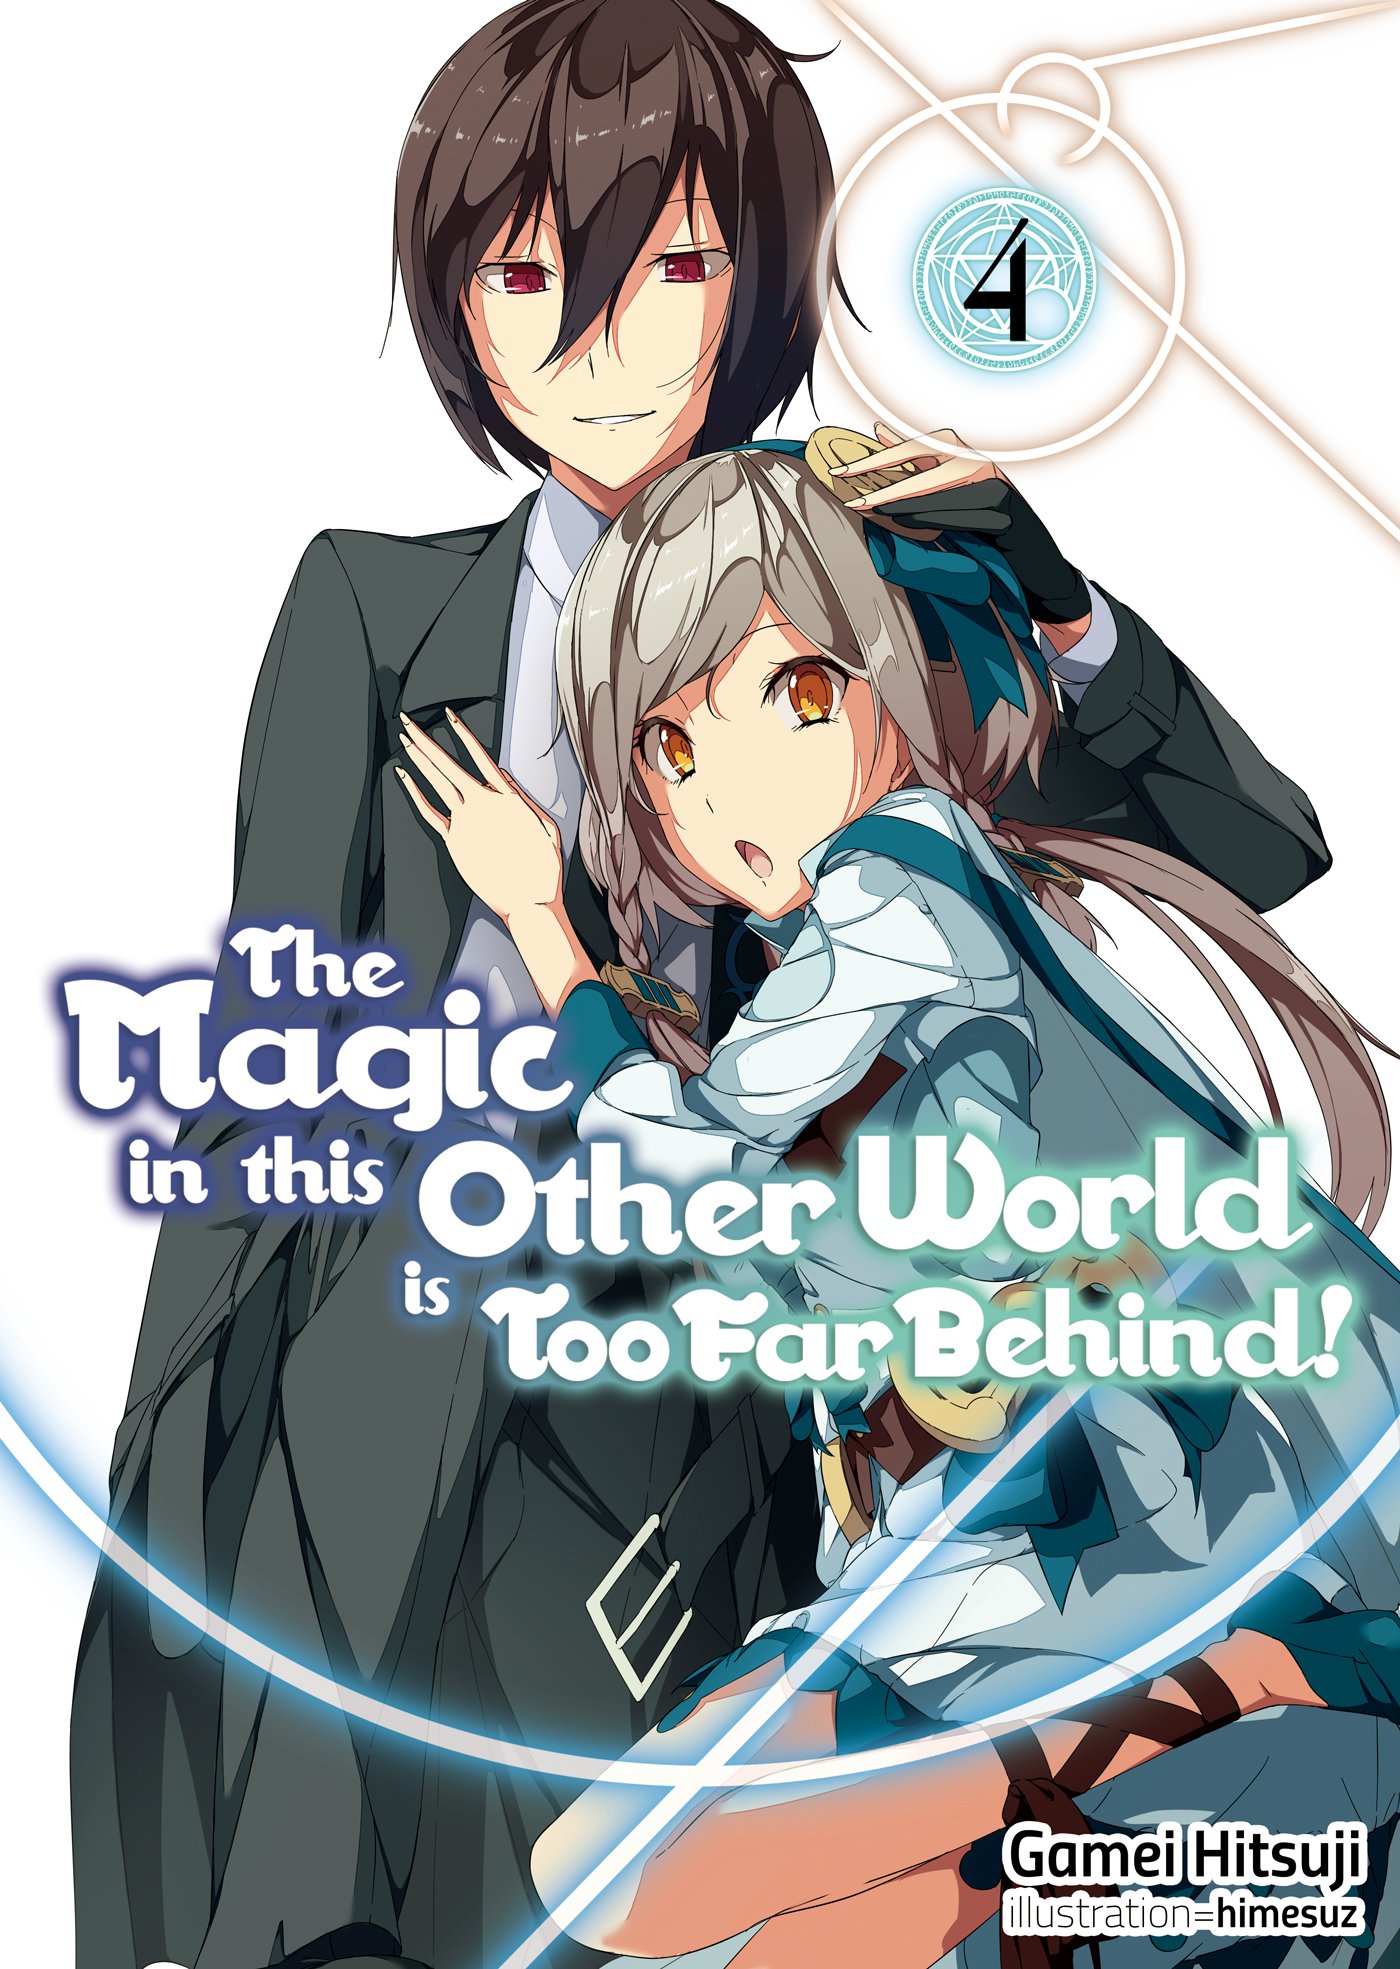 The Magic in this Other World is Too Far Behind! - Volume 4 | Gamei Hitsuji